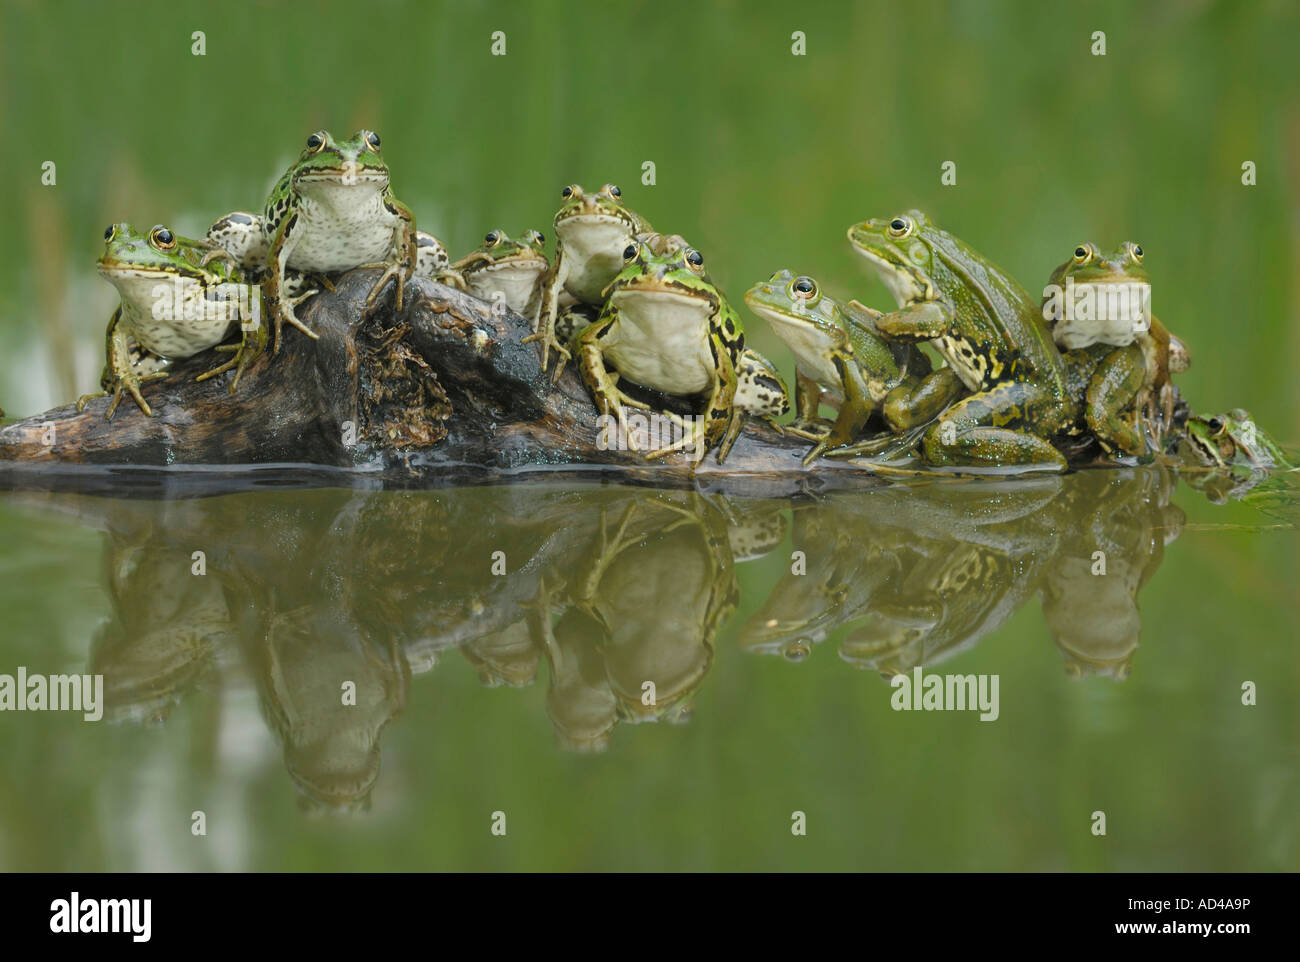 A group of edible frogs (Rana esculenta) with reflection in a pool Stock Photo